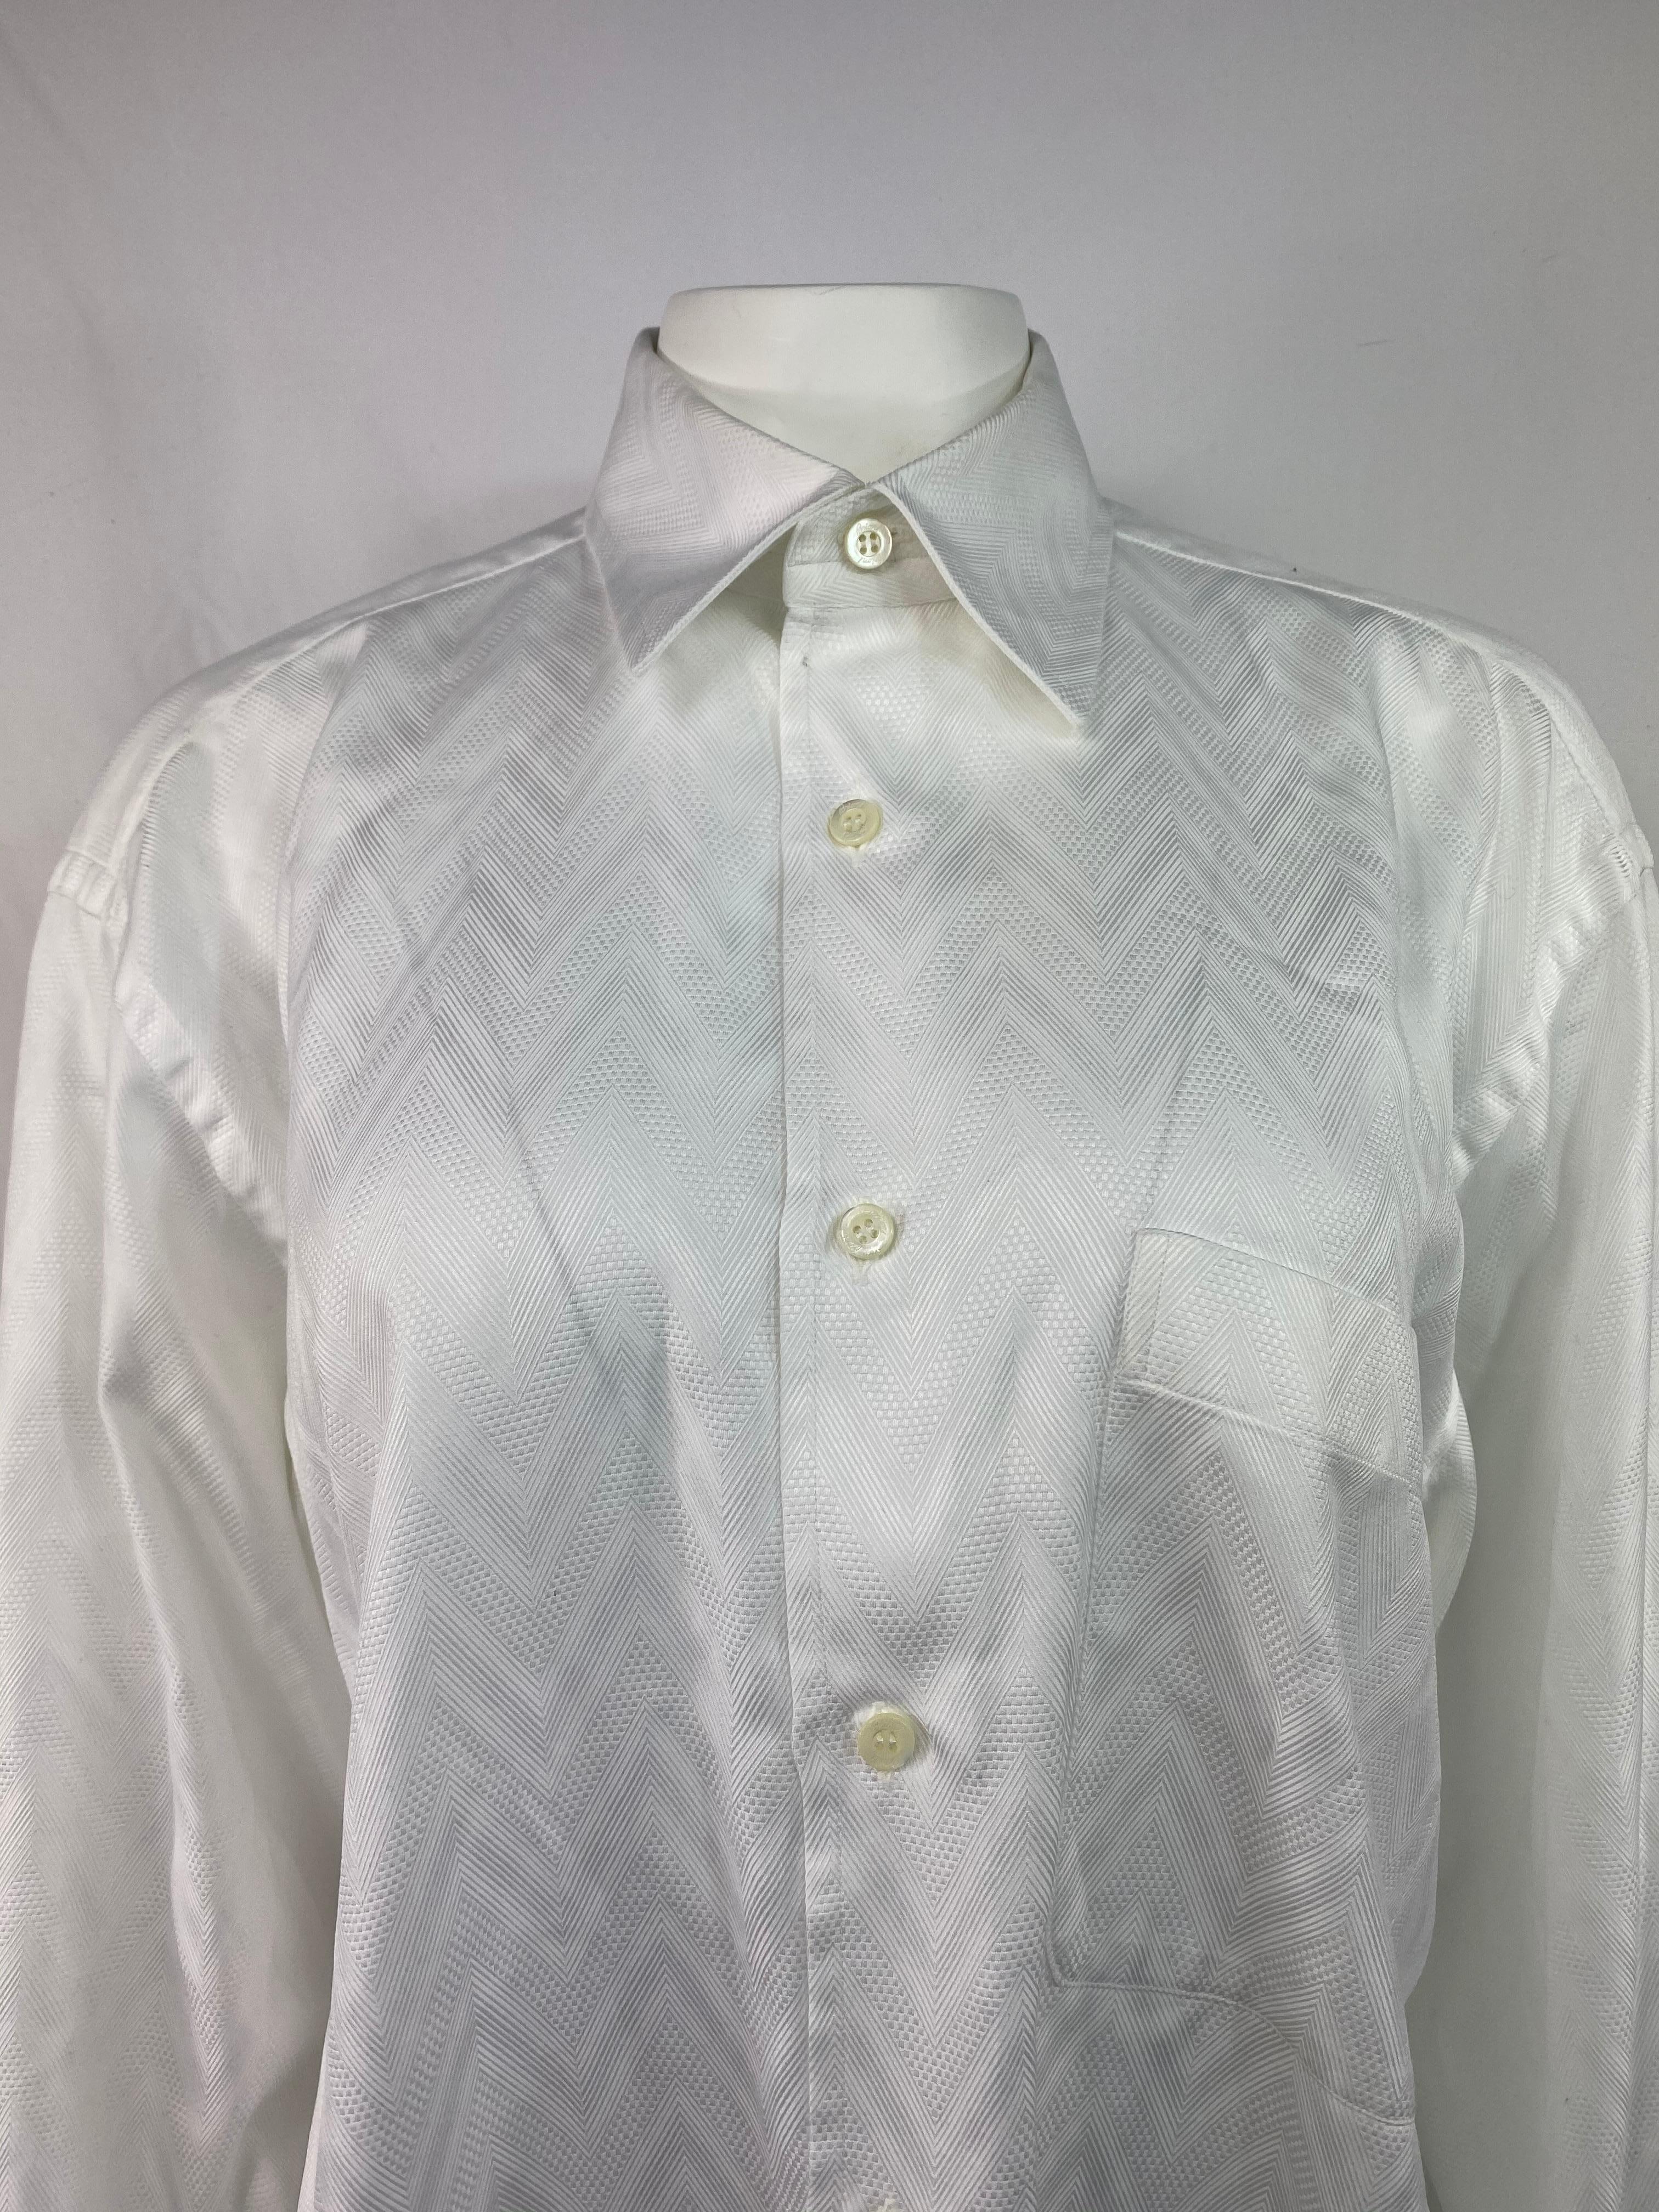 Product details:

Featuring white cotton button down shirt with doted and striped zigzag geometric pattern, front left pocket and collar detail. Formal fit.
Made in Italy.